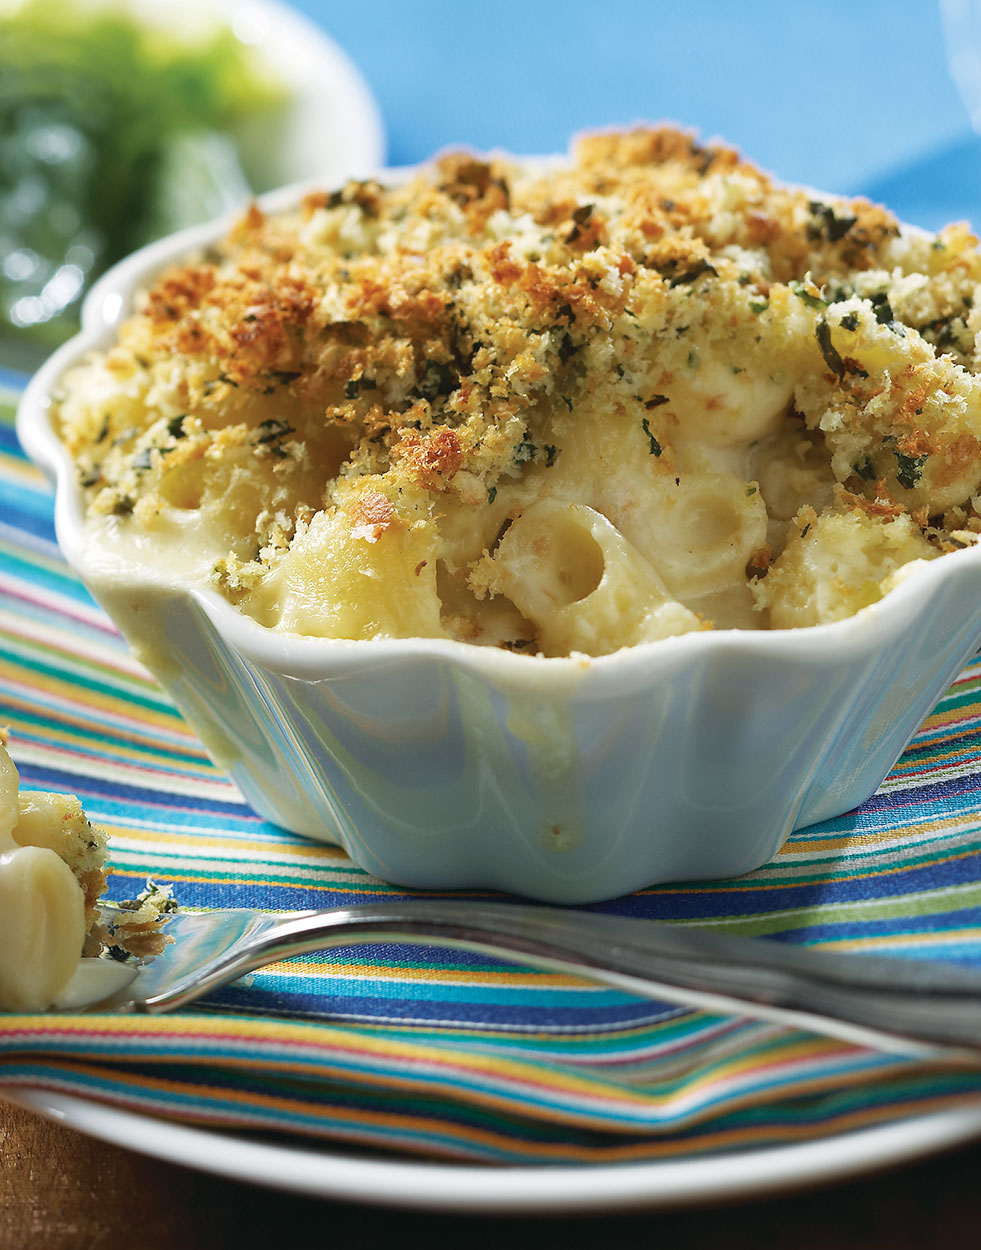 baked macaroni and cheese bread crumbs